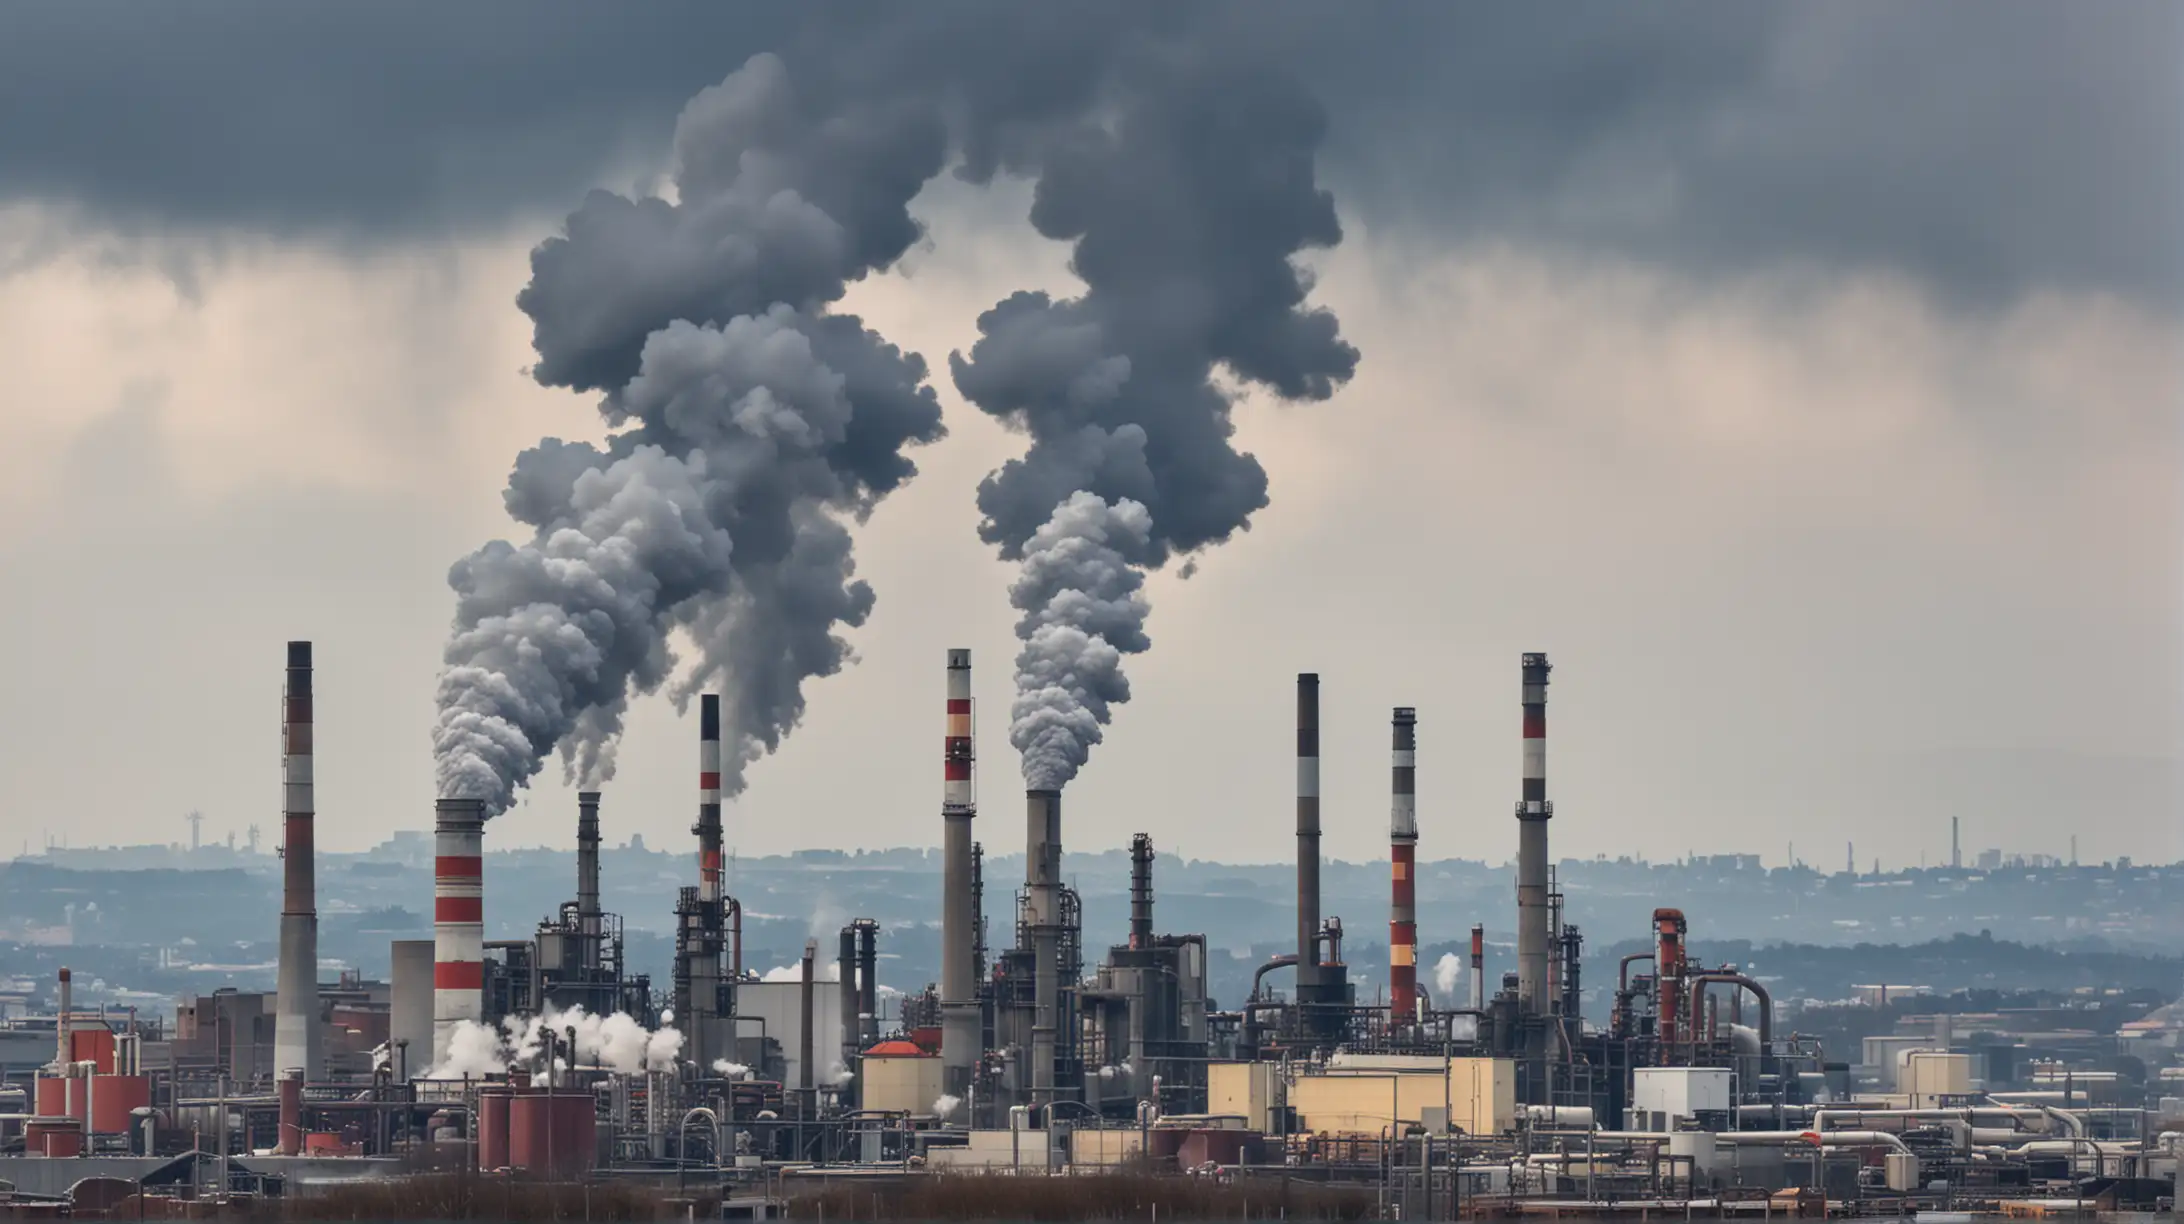 Air pollution from industrial plants